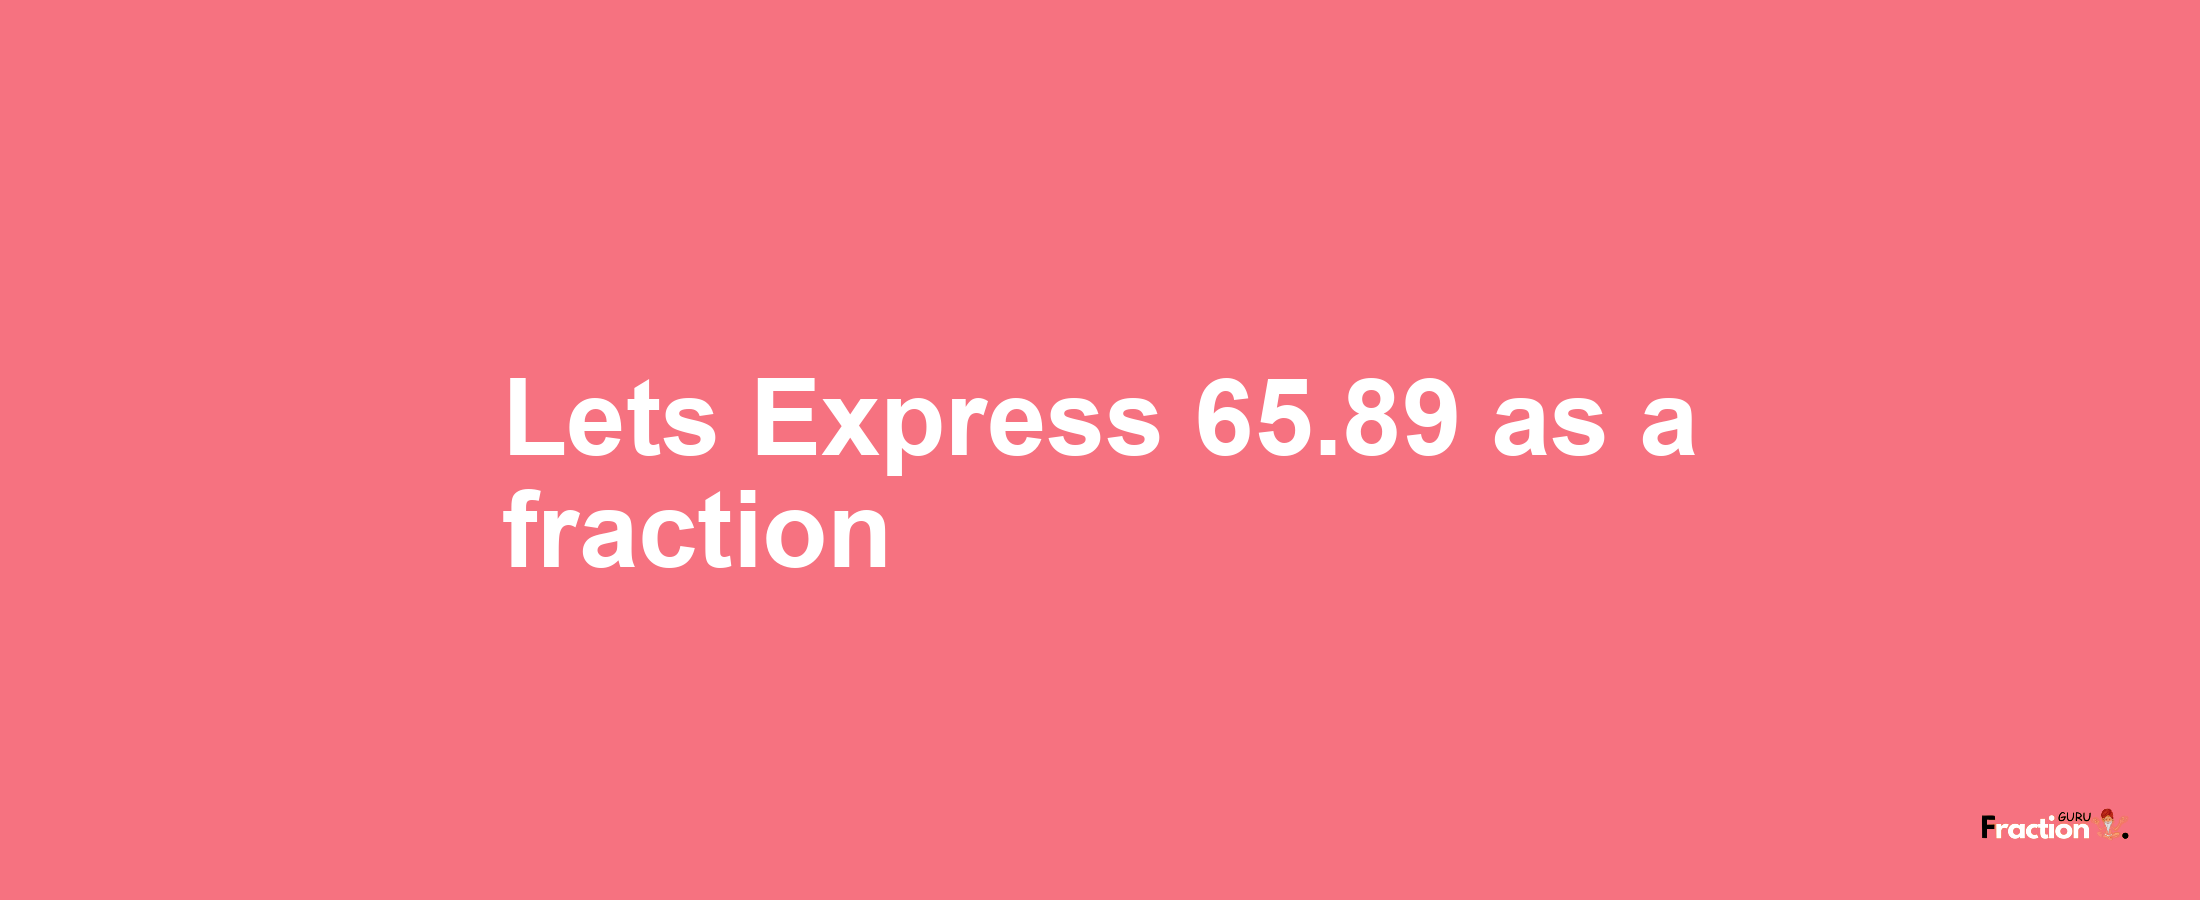 Lets Express 65.89 as afraction